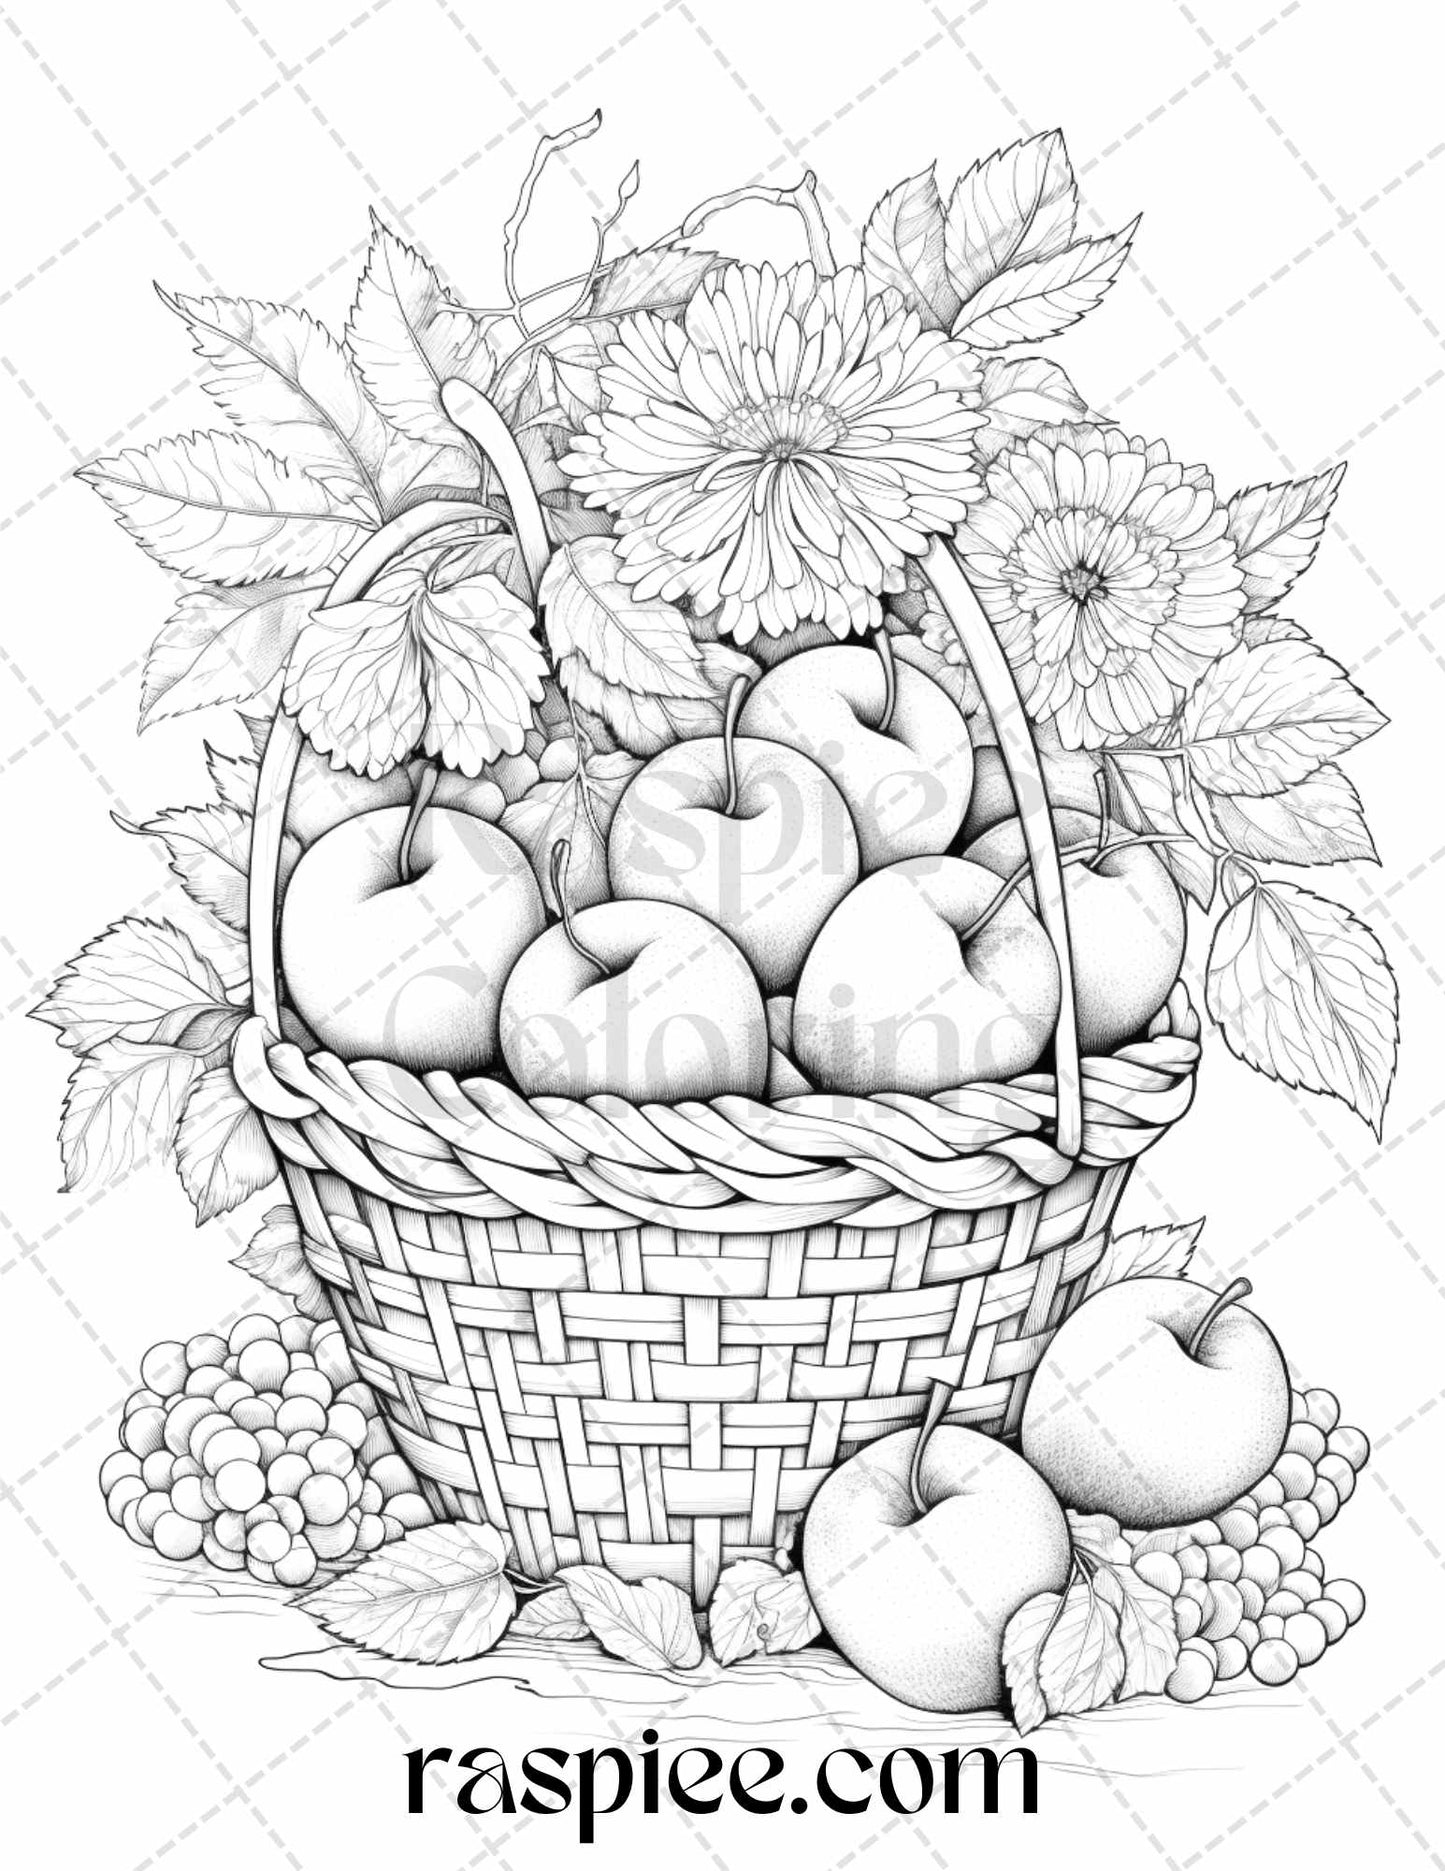 autumn vibes coloring pages printable for adults, autumn leaf grayscale coloring page, fall foliage printable coloring sheet